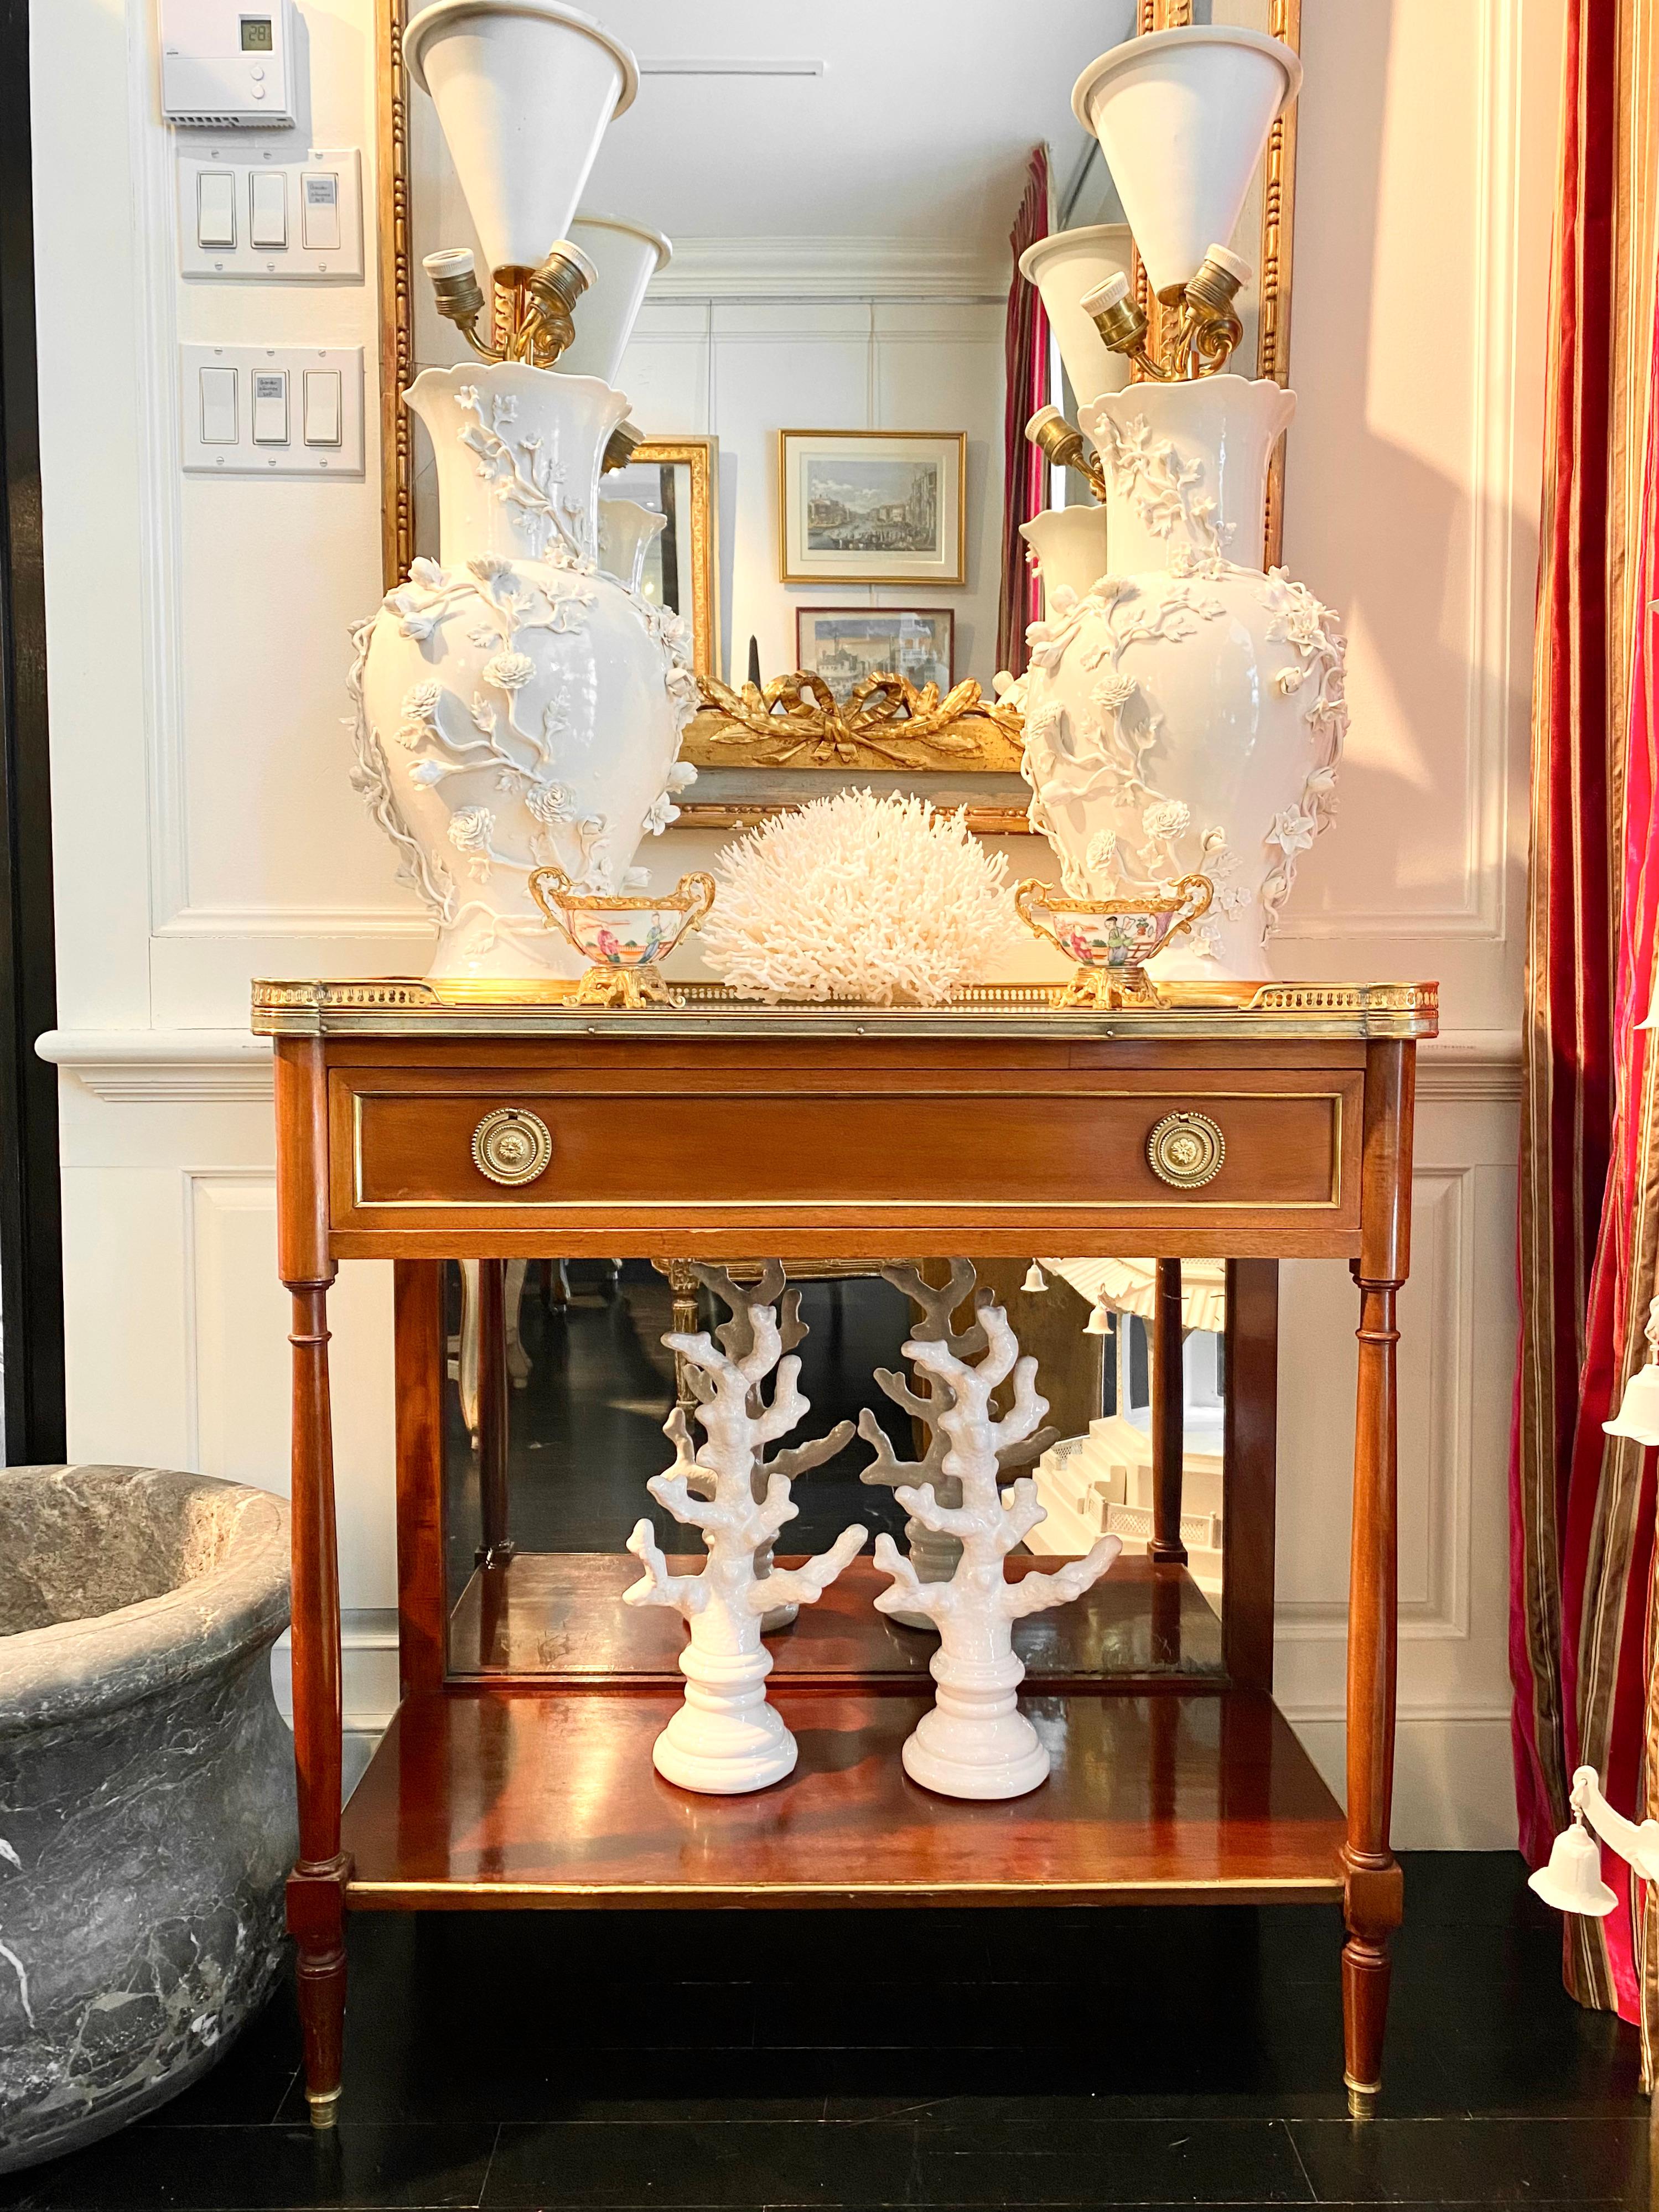 Louis XVI style, marble top console, bronze gallery, mirror back
Long single top drawer and bottom shelf mounted on four legs with bronze sabot caps. White marble top with circular corners surrounded by a bronze pierced gallery. Gilt bronze